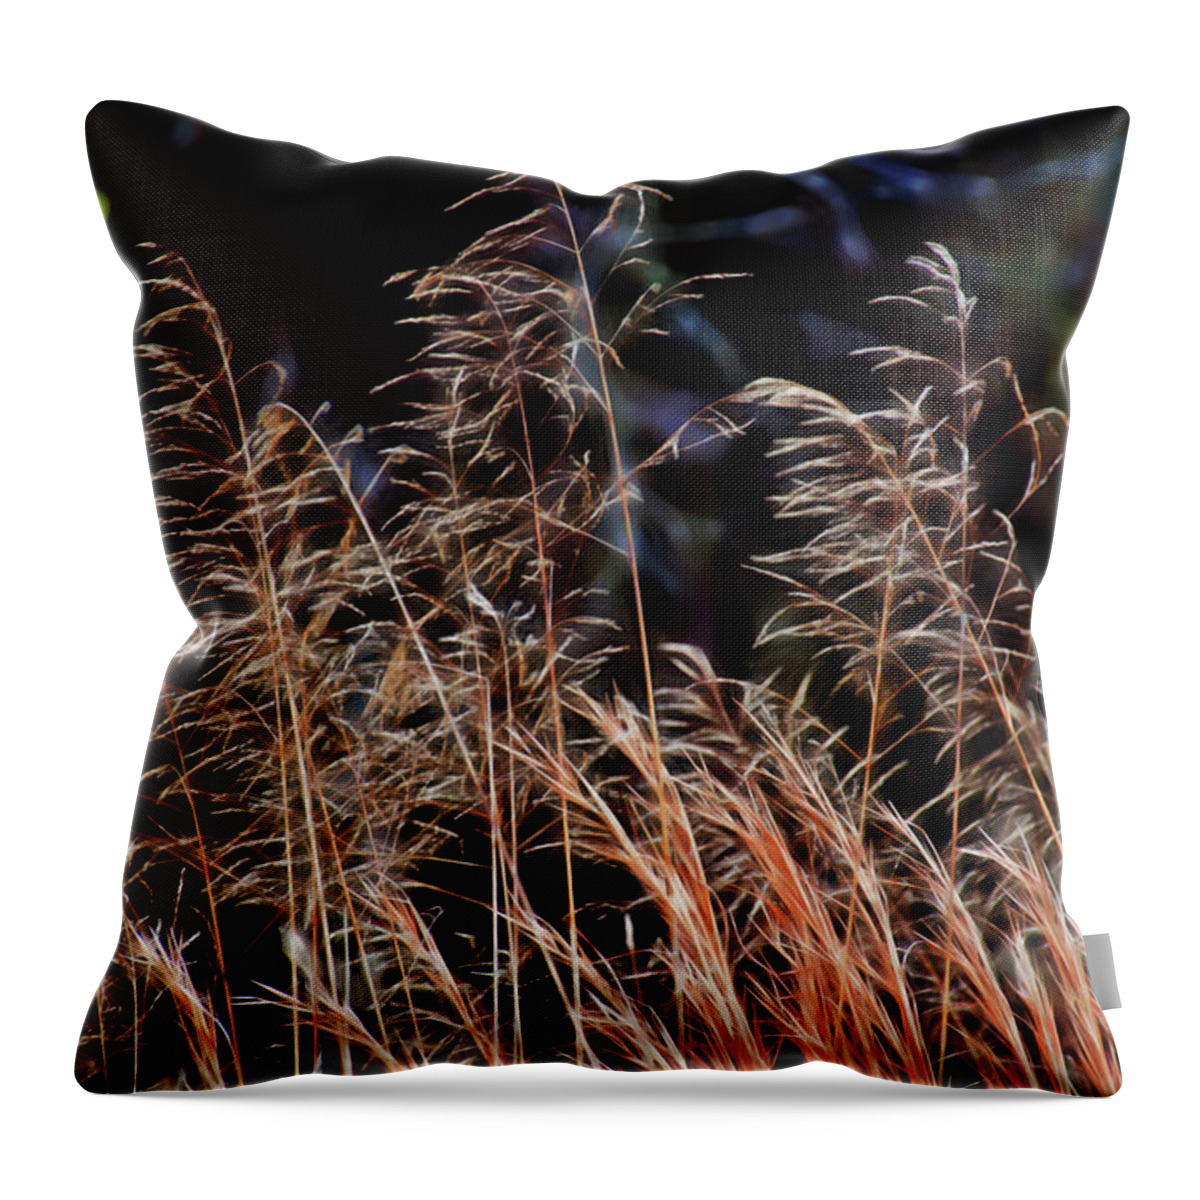 Saw Grass Throw Pillow featuring the photograph Saw Grass by Gina O'Brien